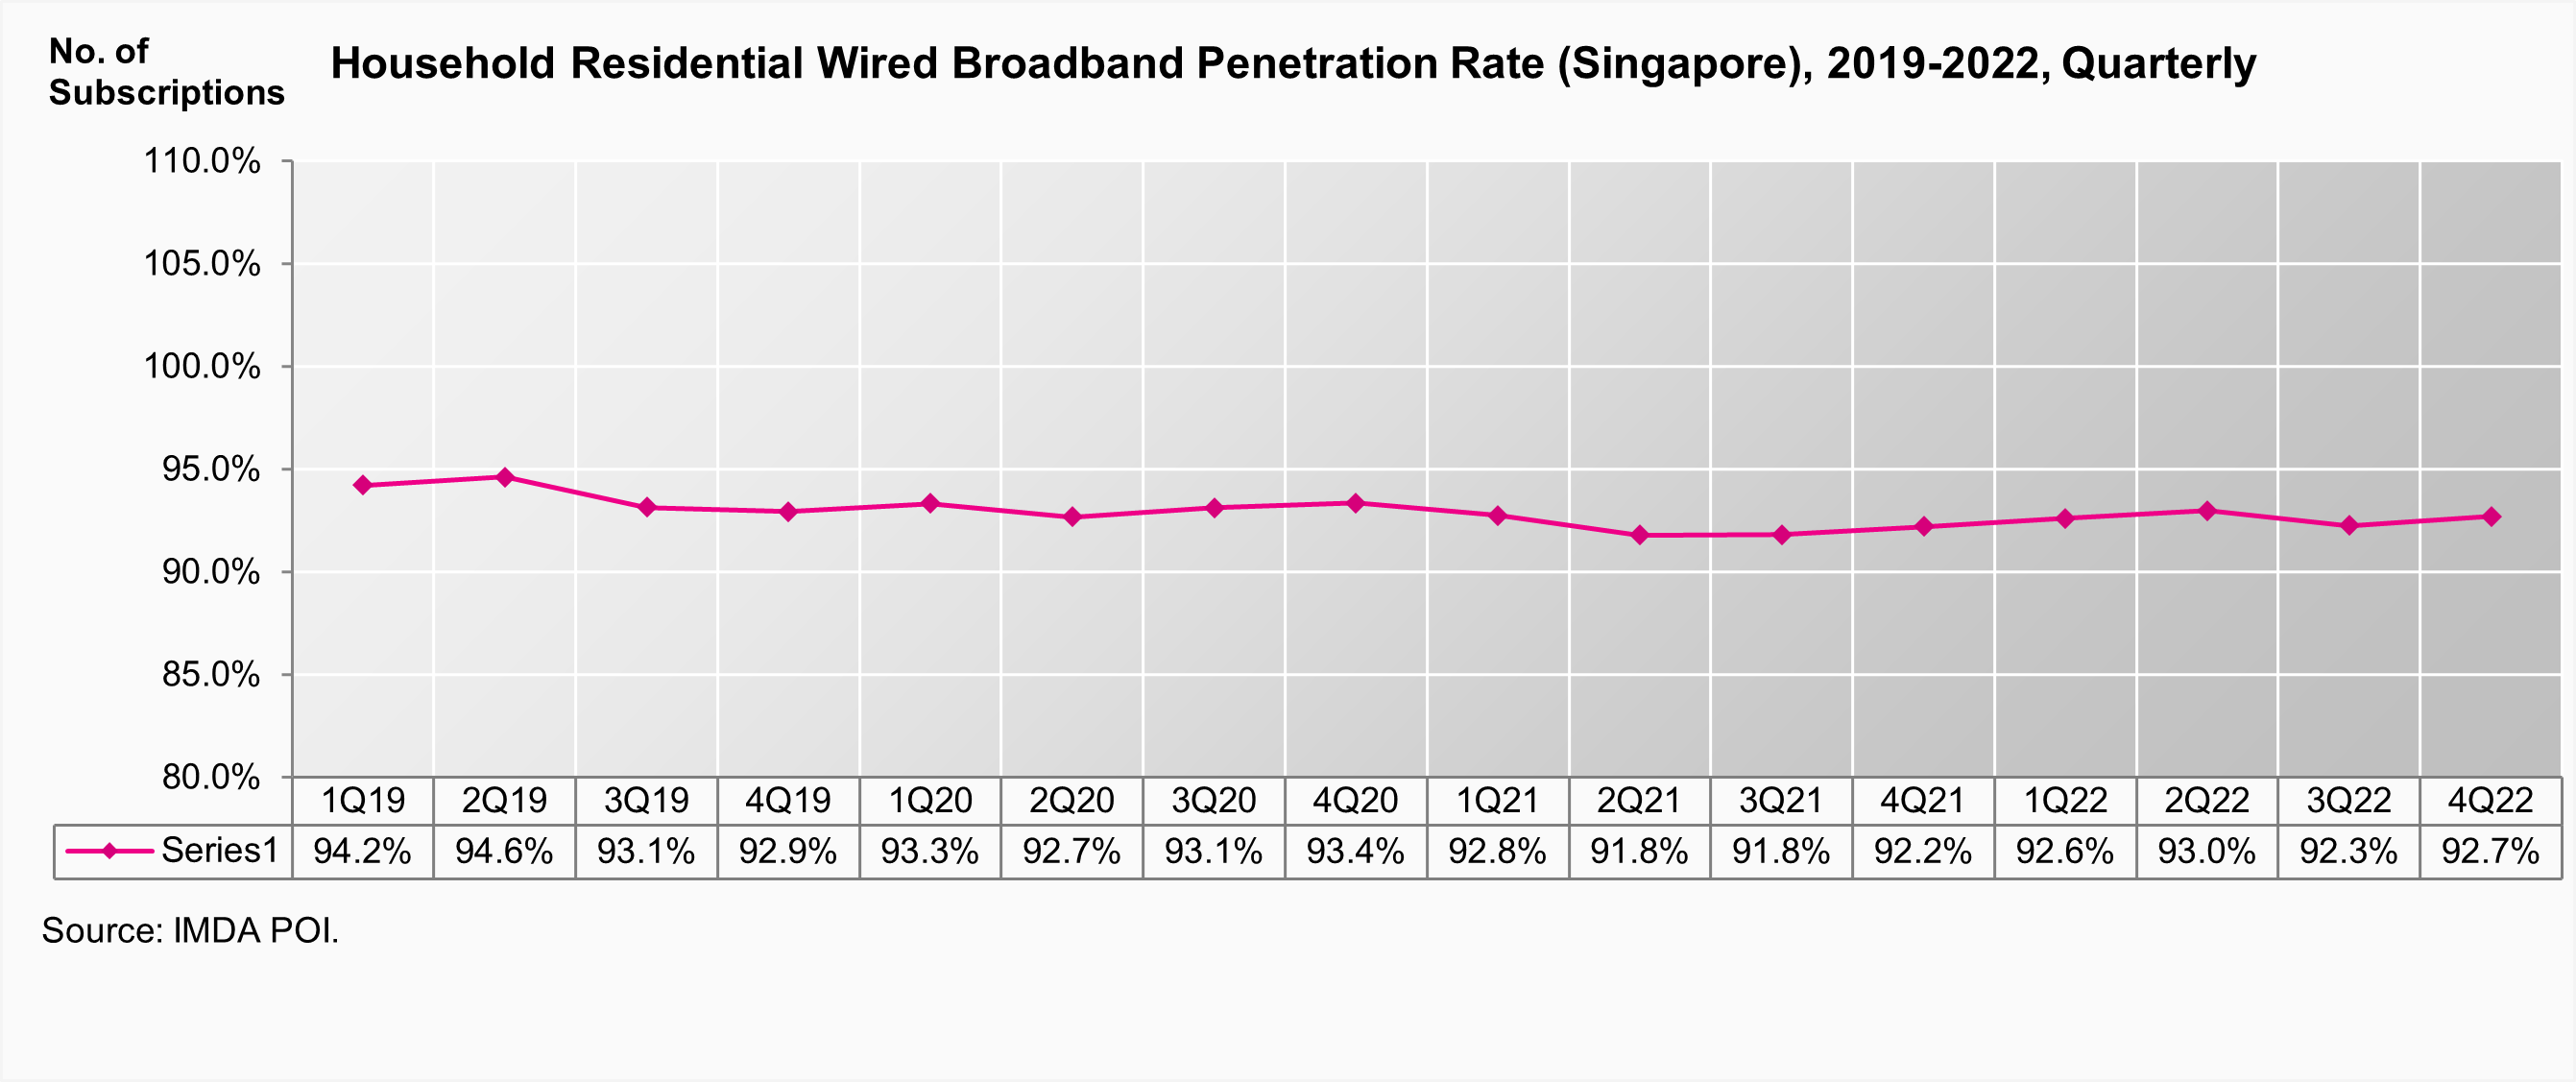 A Statistical Chart on Household Residential Wired Broadband Penetration Rate (Singapore) 2019-2022, Quarterly by IMDA POI